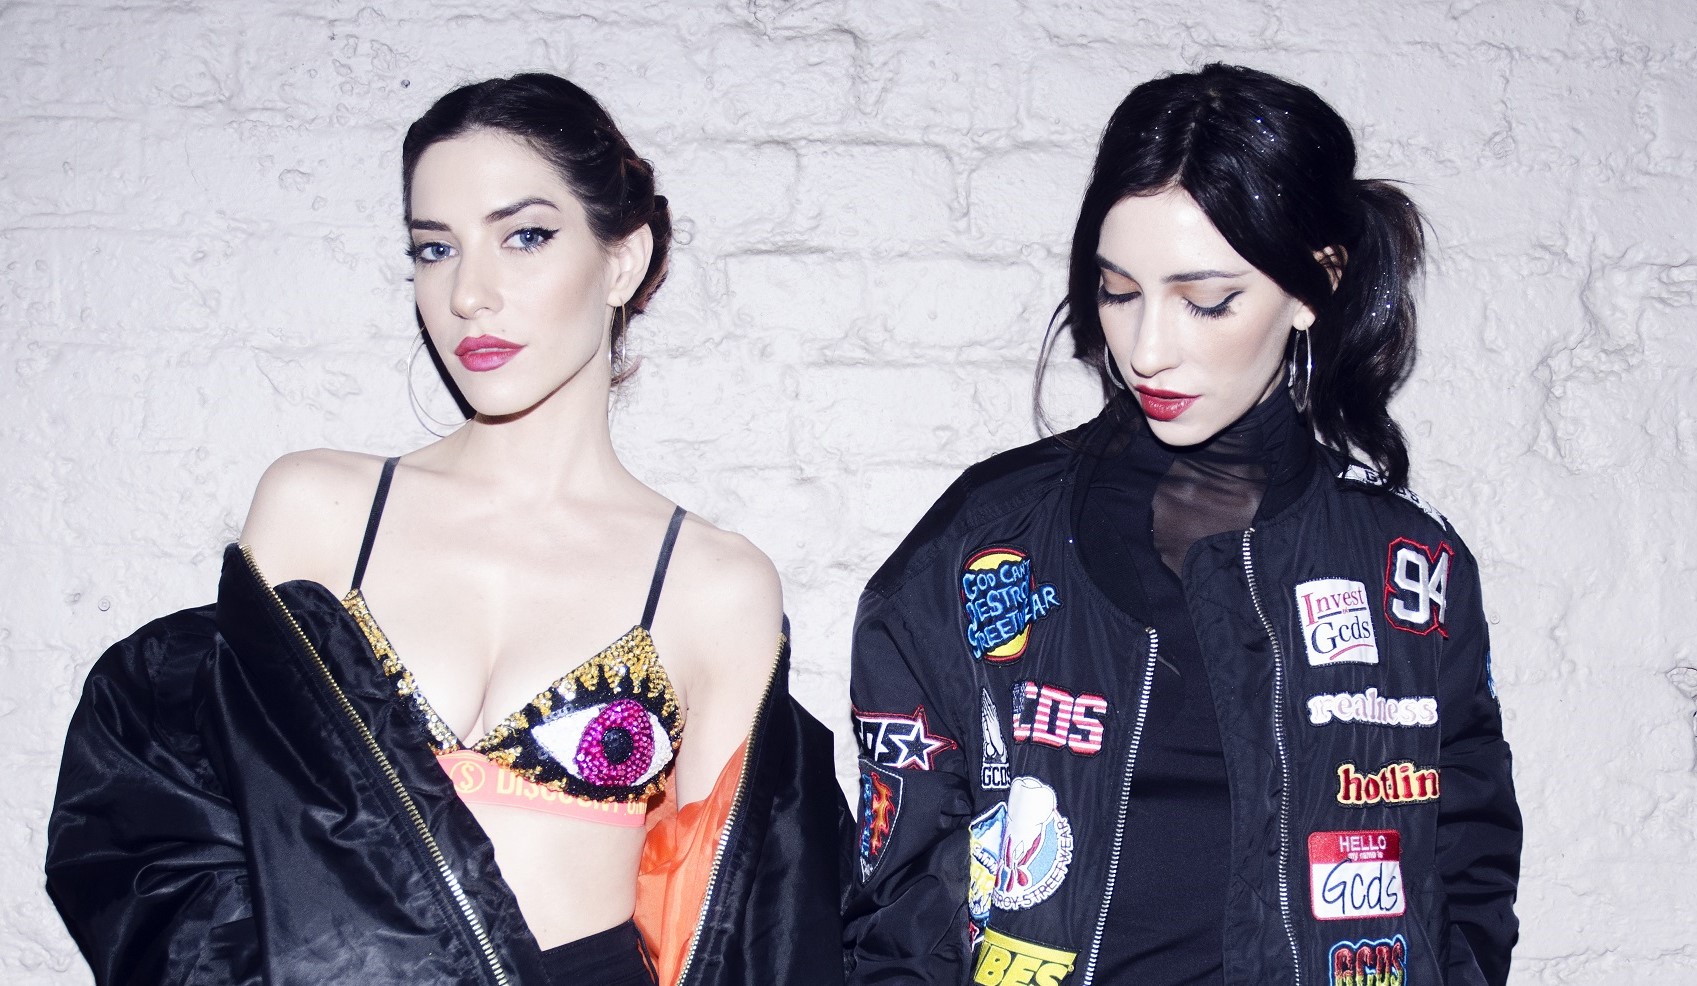 THE VERONICAS RELEASE NEW SINGLE ‘ON YOUR SIDE’